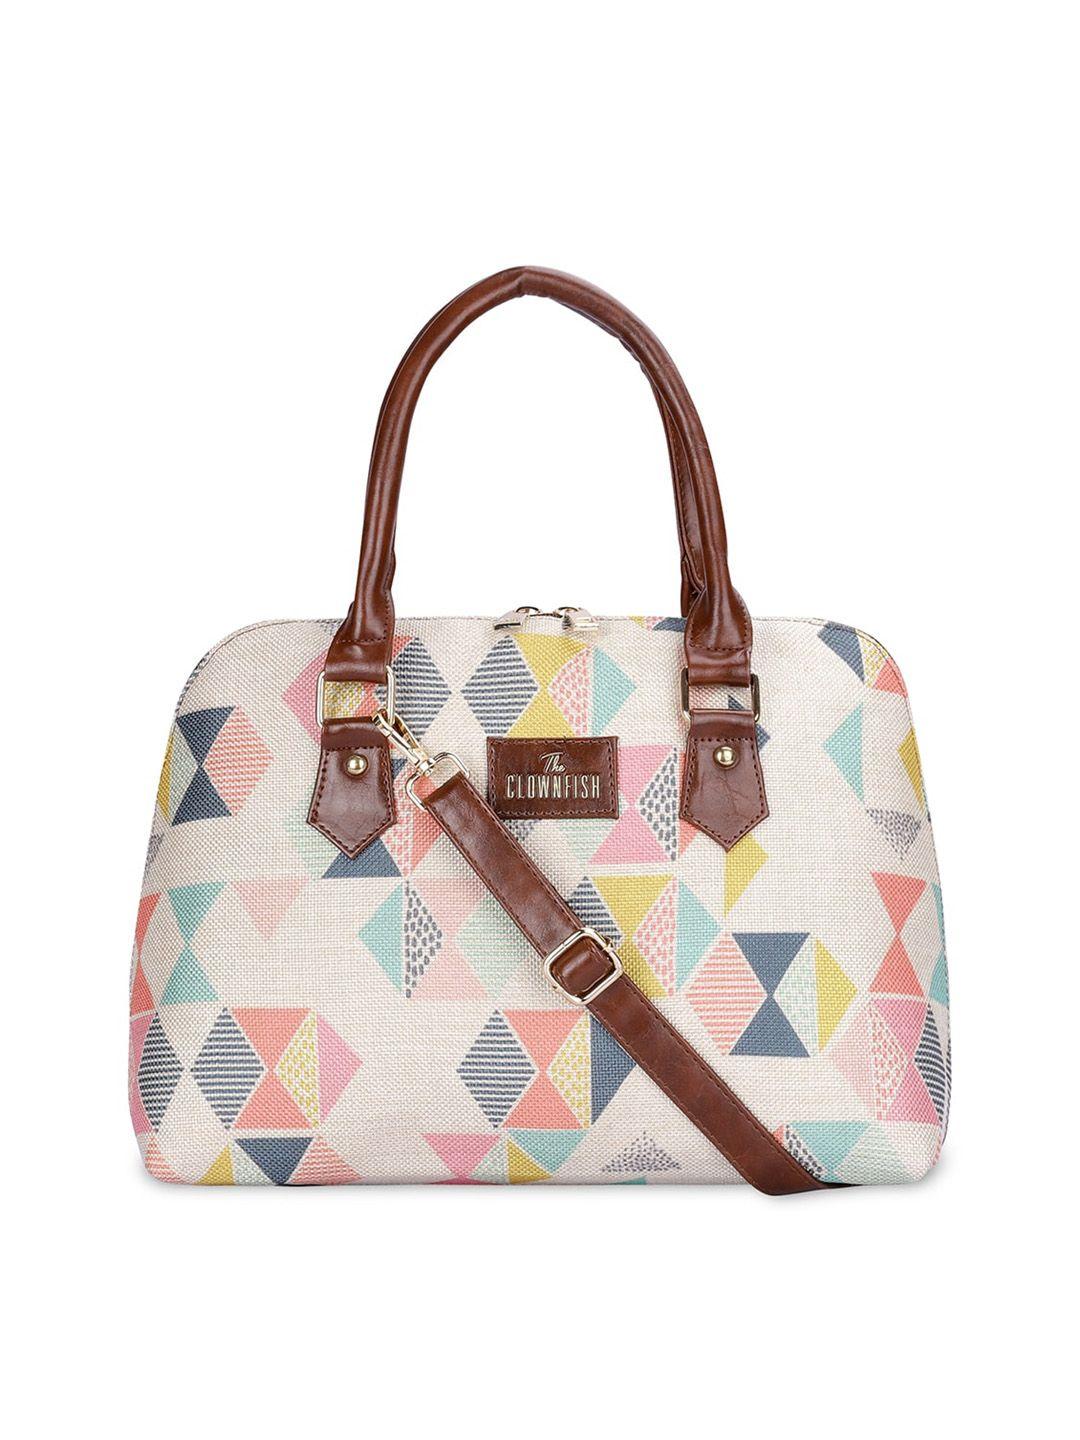 the clownfish pink geometric printed structured handheld bag